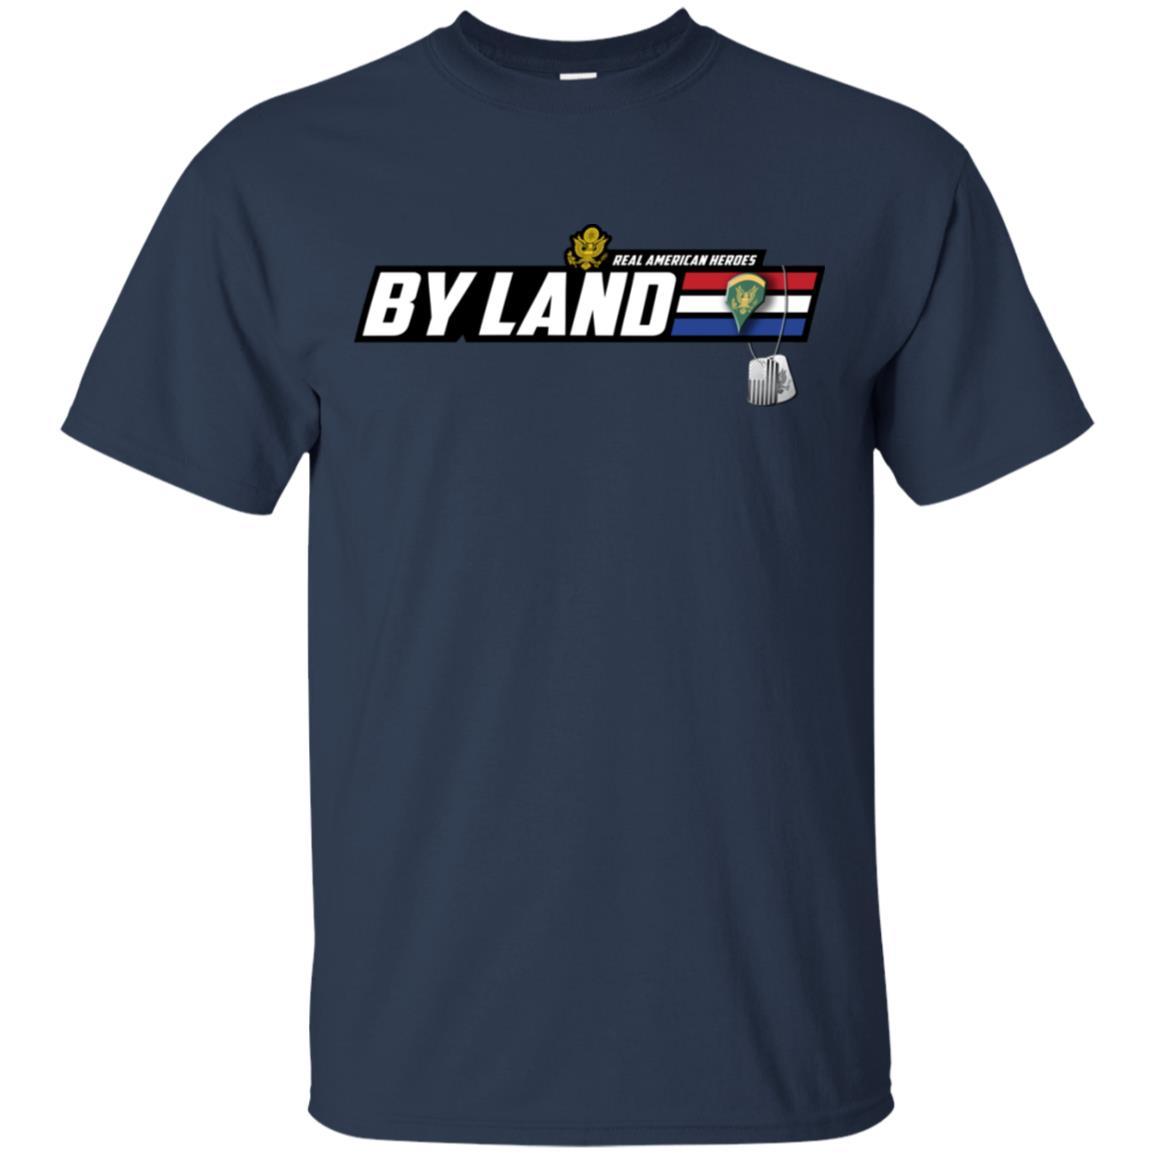 US Army T-Shirt "Real American Heroes By Land" E-5 SPC(SP5) On Front-TShirt-Army-Veterans Nation